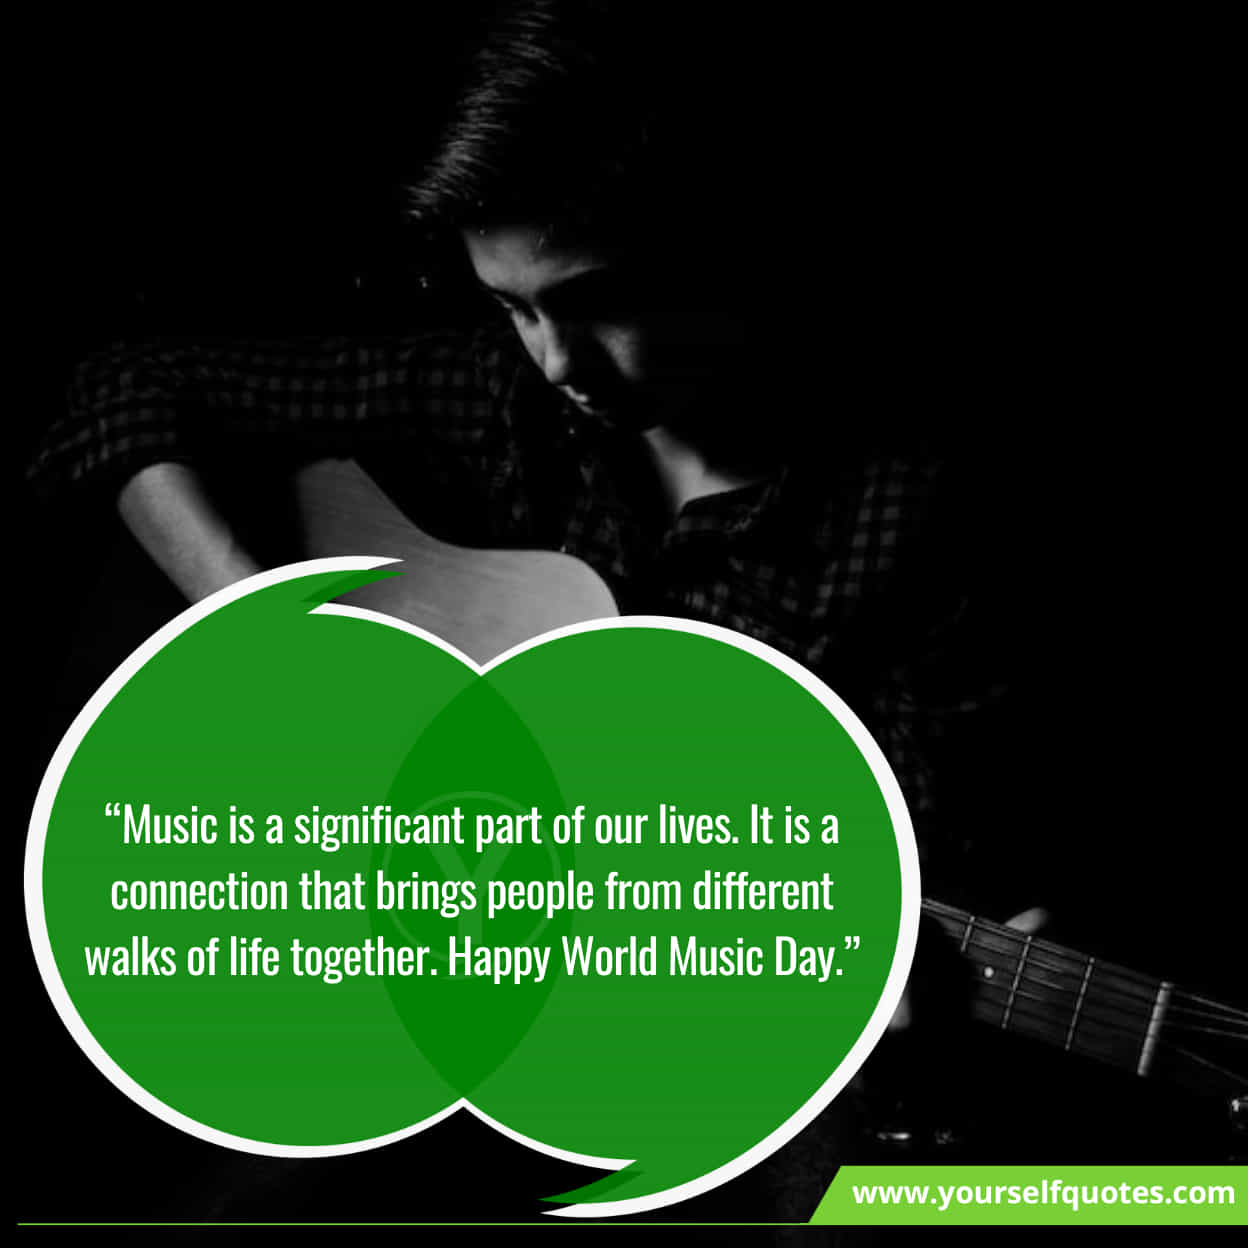 Quotes to celebrate the power of music on World Music Day